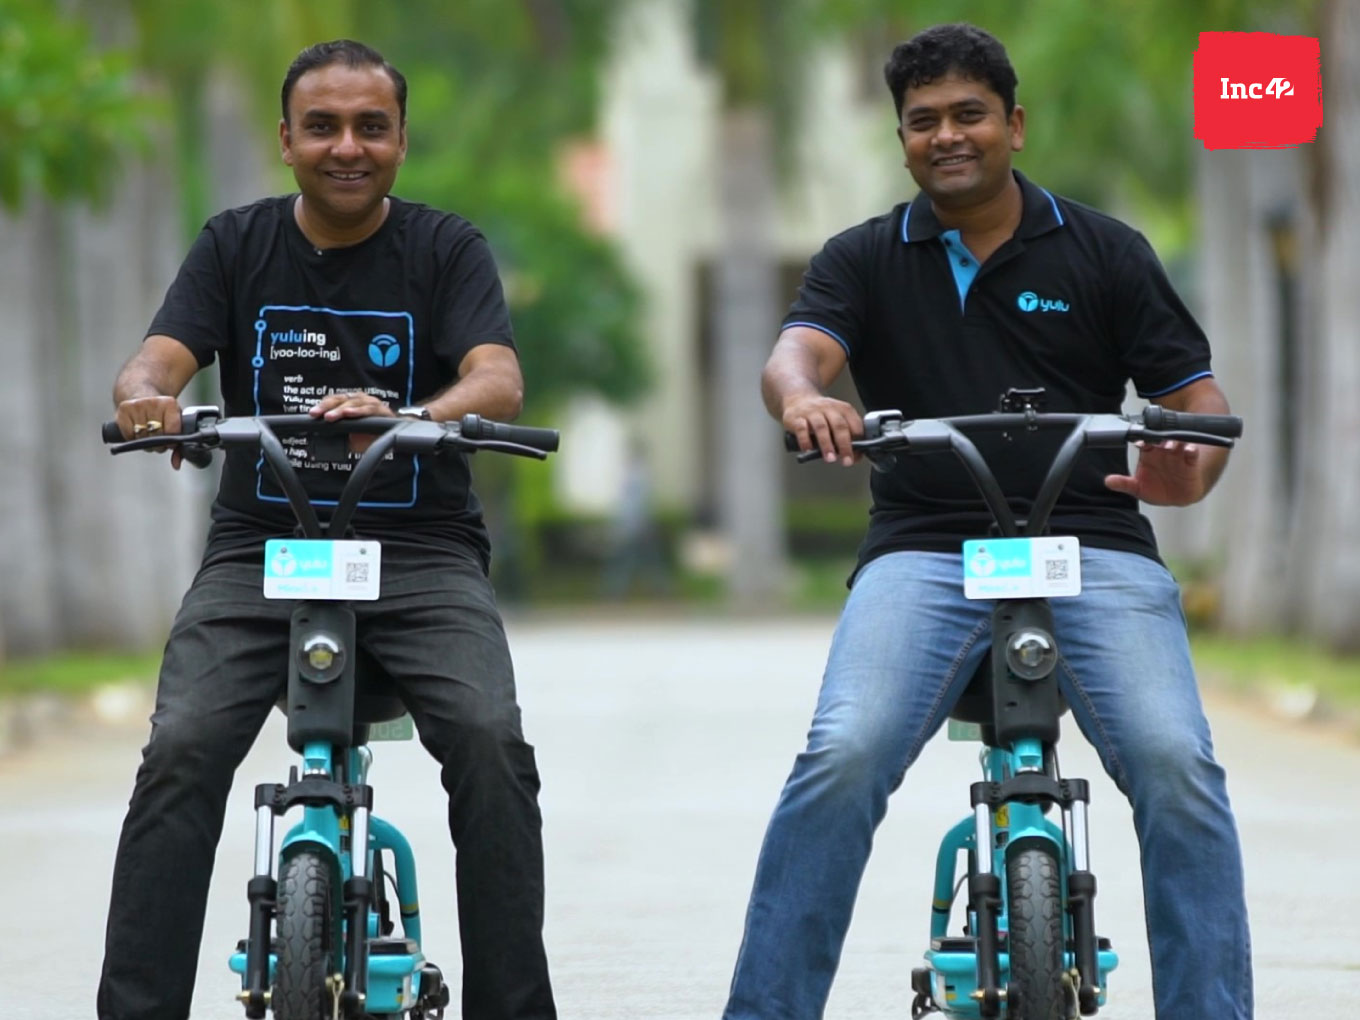 Yulu uses micromobilty solutions to counter congestion and pollution